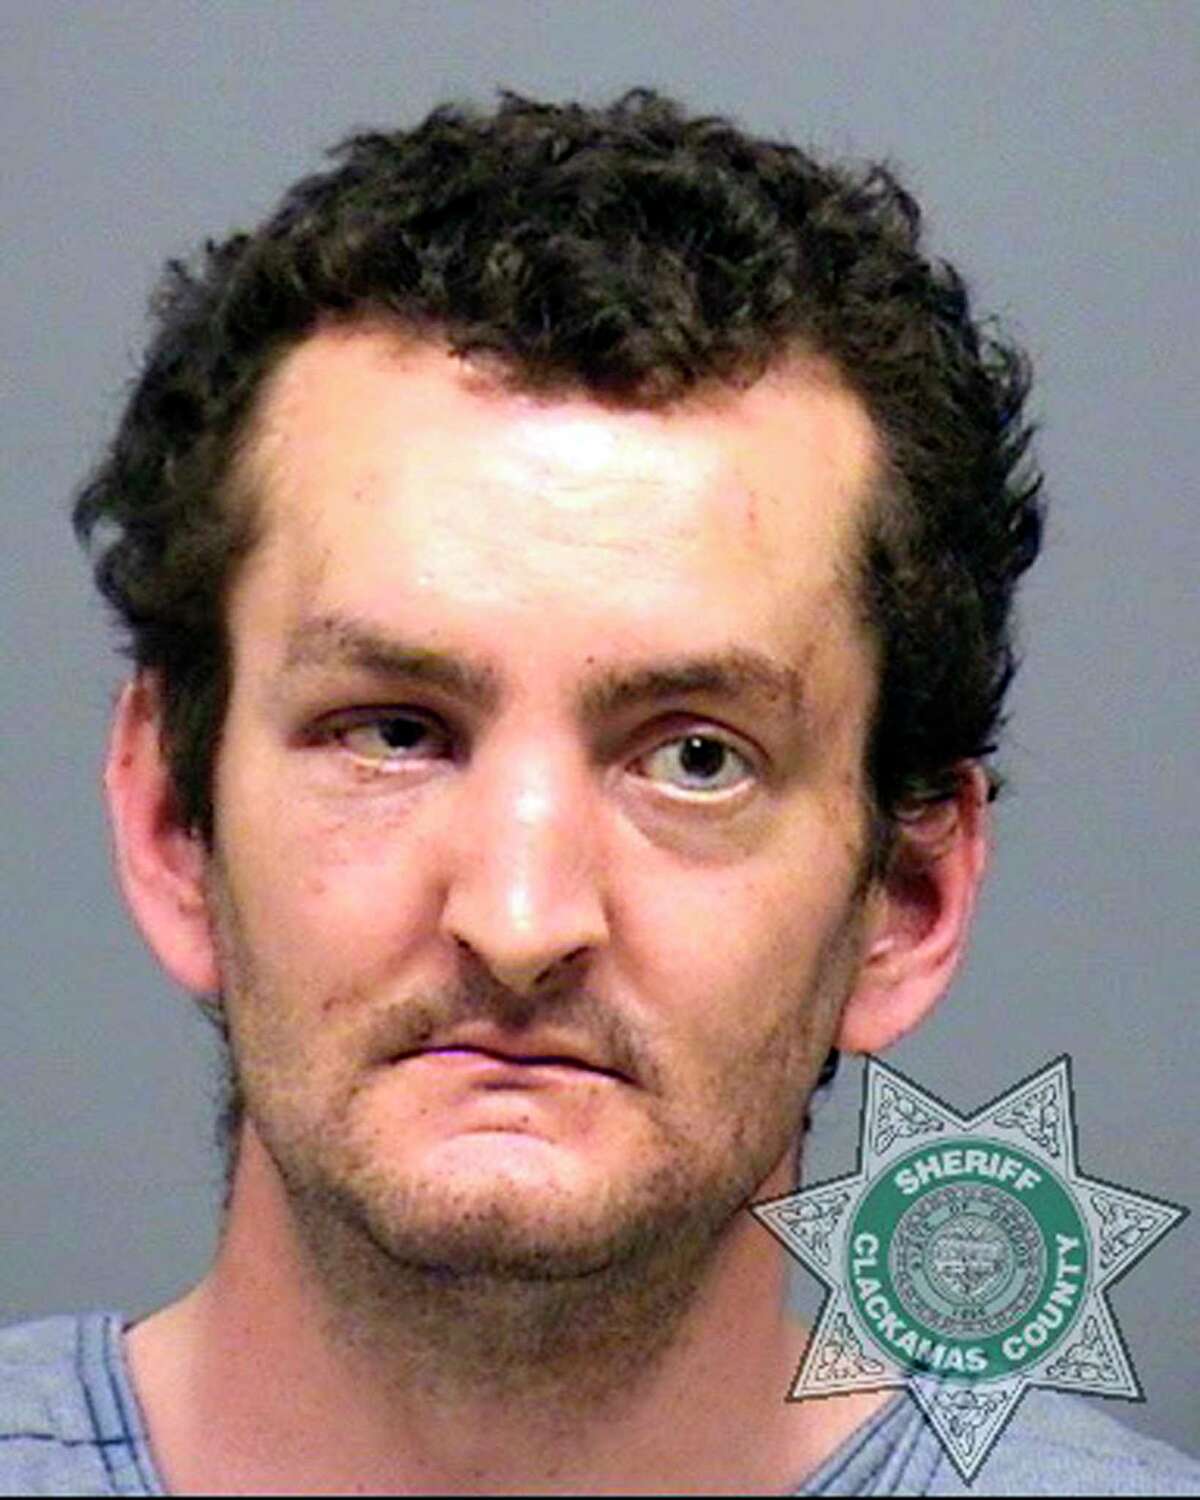 This undated photo provided by the Clackamas County Sheriff's office shows Joshua Webb. Webb has been arrested and charged with murder and attempted murder in connection with the stabbing of a grocery employee in Estacada, Ore., Sunday, May 15, 2017, and the discovery of his mother's body in the house they both shared. (Clackamas County Sheriff's Office via AP)